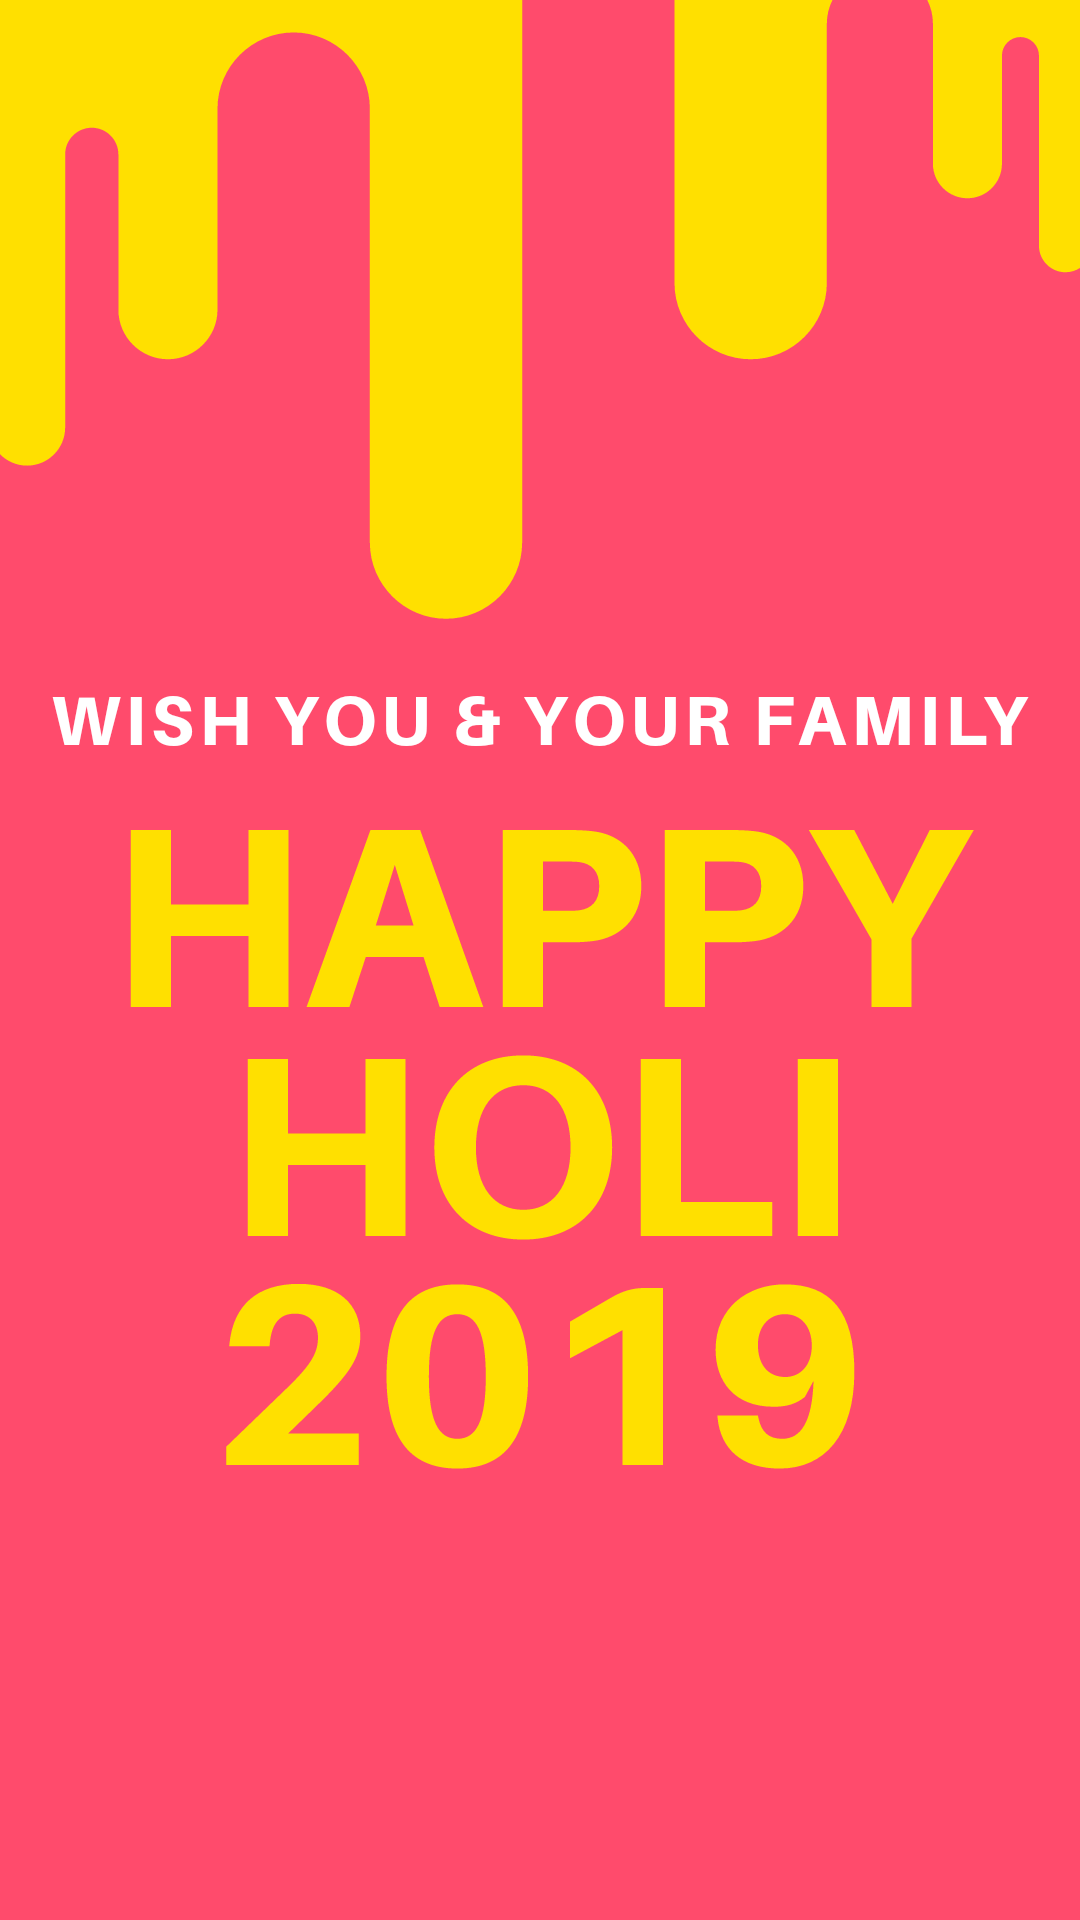 Happy Holi Background Hd, Awesome Background Hd, Images - Zoo York -  1080x1920 Wallpaper 